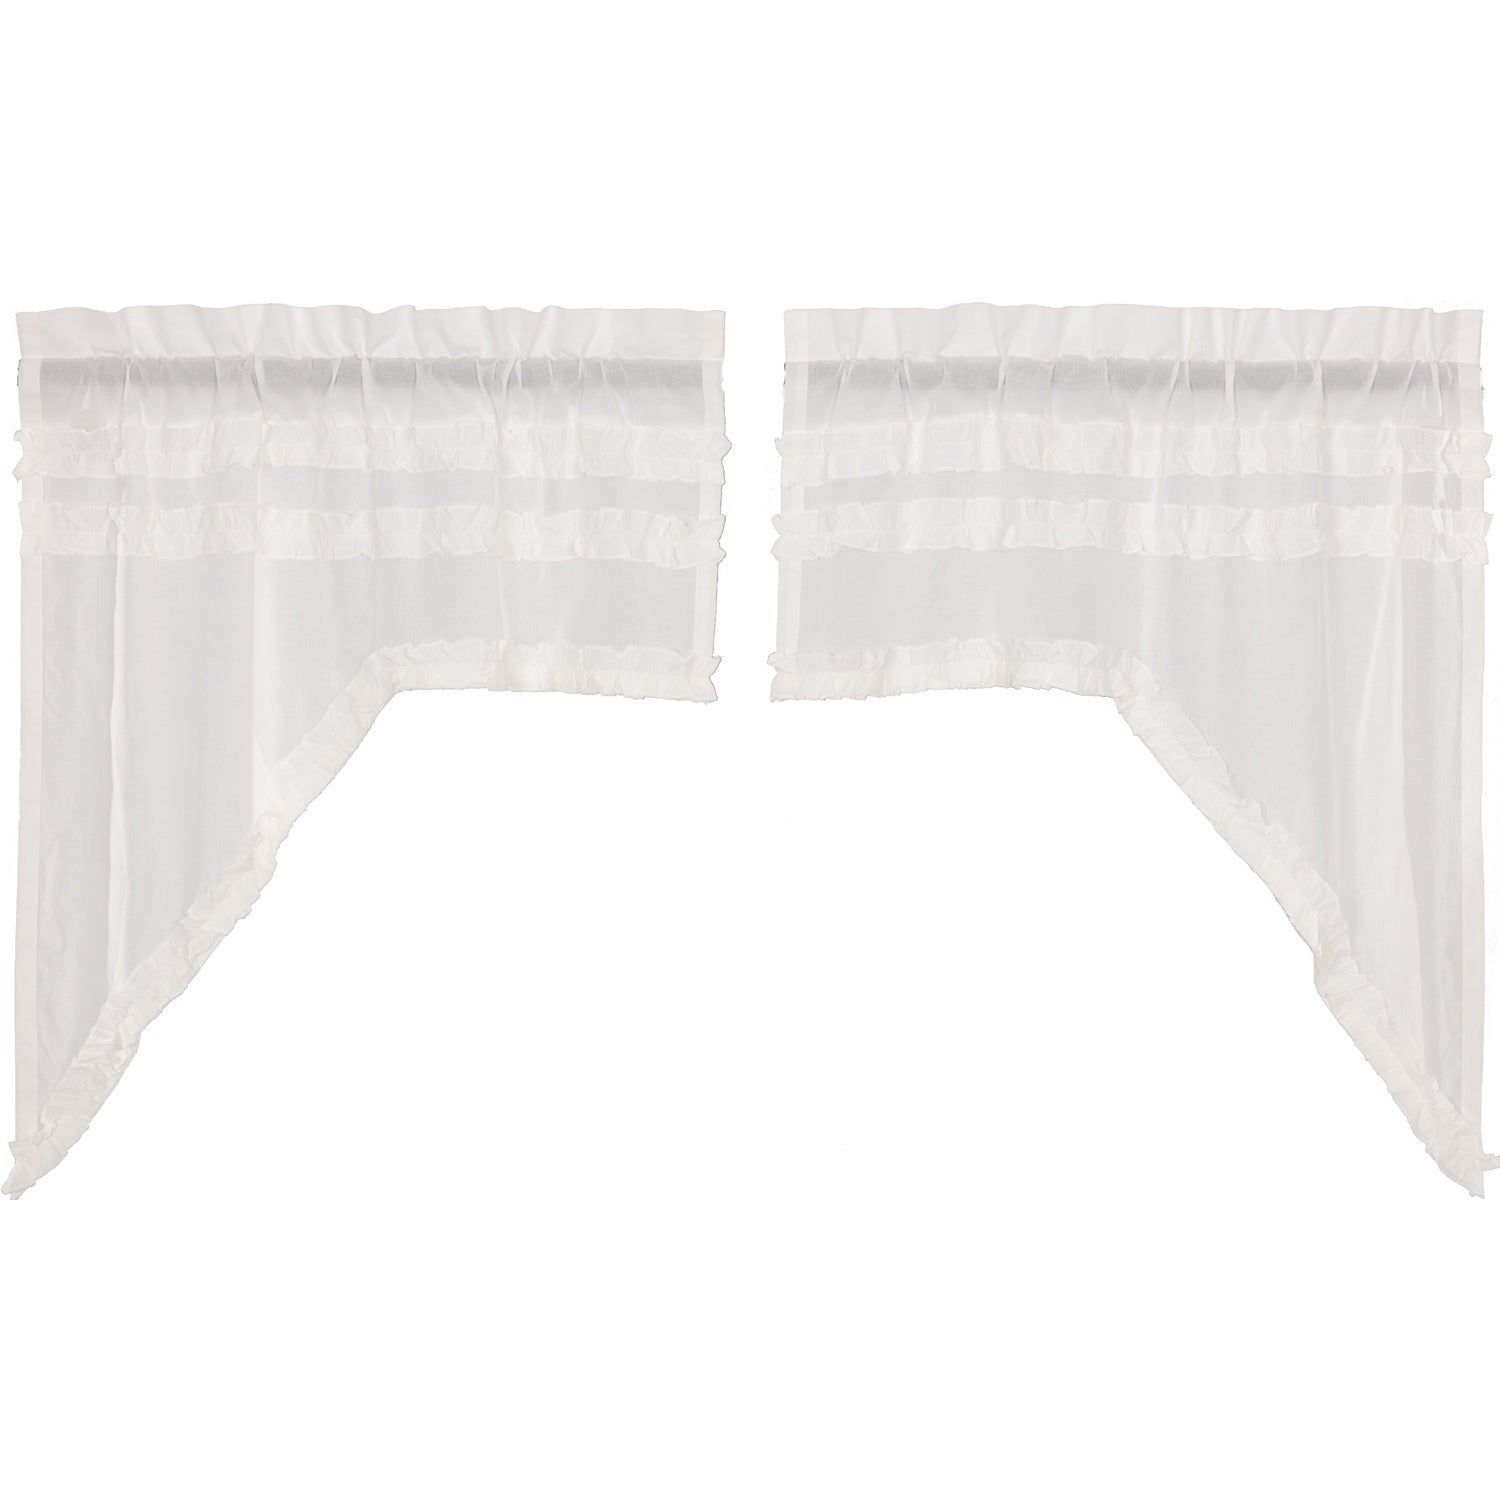 White Farmhouse Kitchen Curtains Vhc White Ruffled Sheer Petticoat Swag  Pair Rod Pocket Cotton Solid Color Ruched Ruffle With White Ruffled Sheer Petticoat Tier Pairs (View 3 of 20)